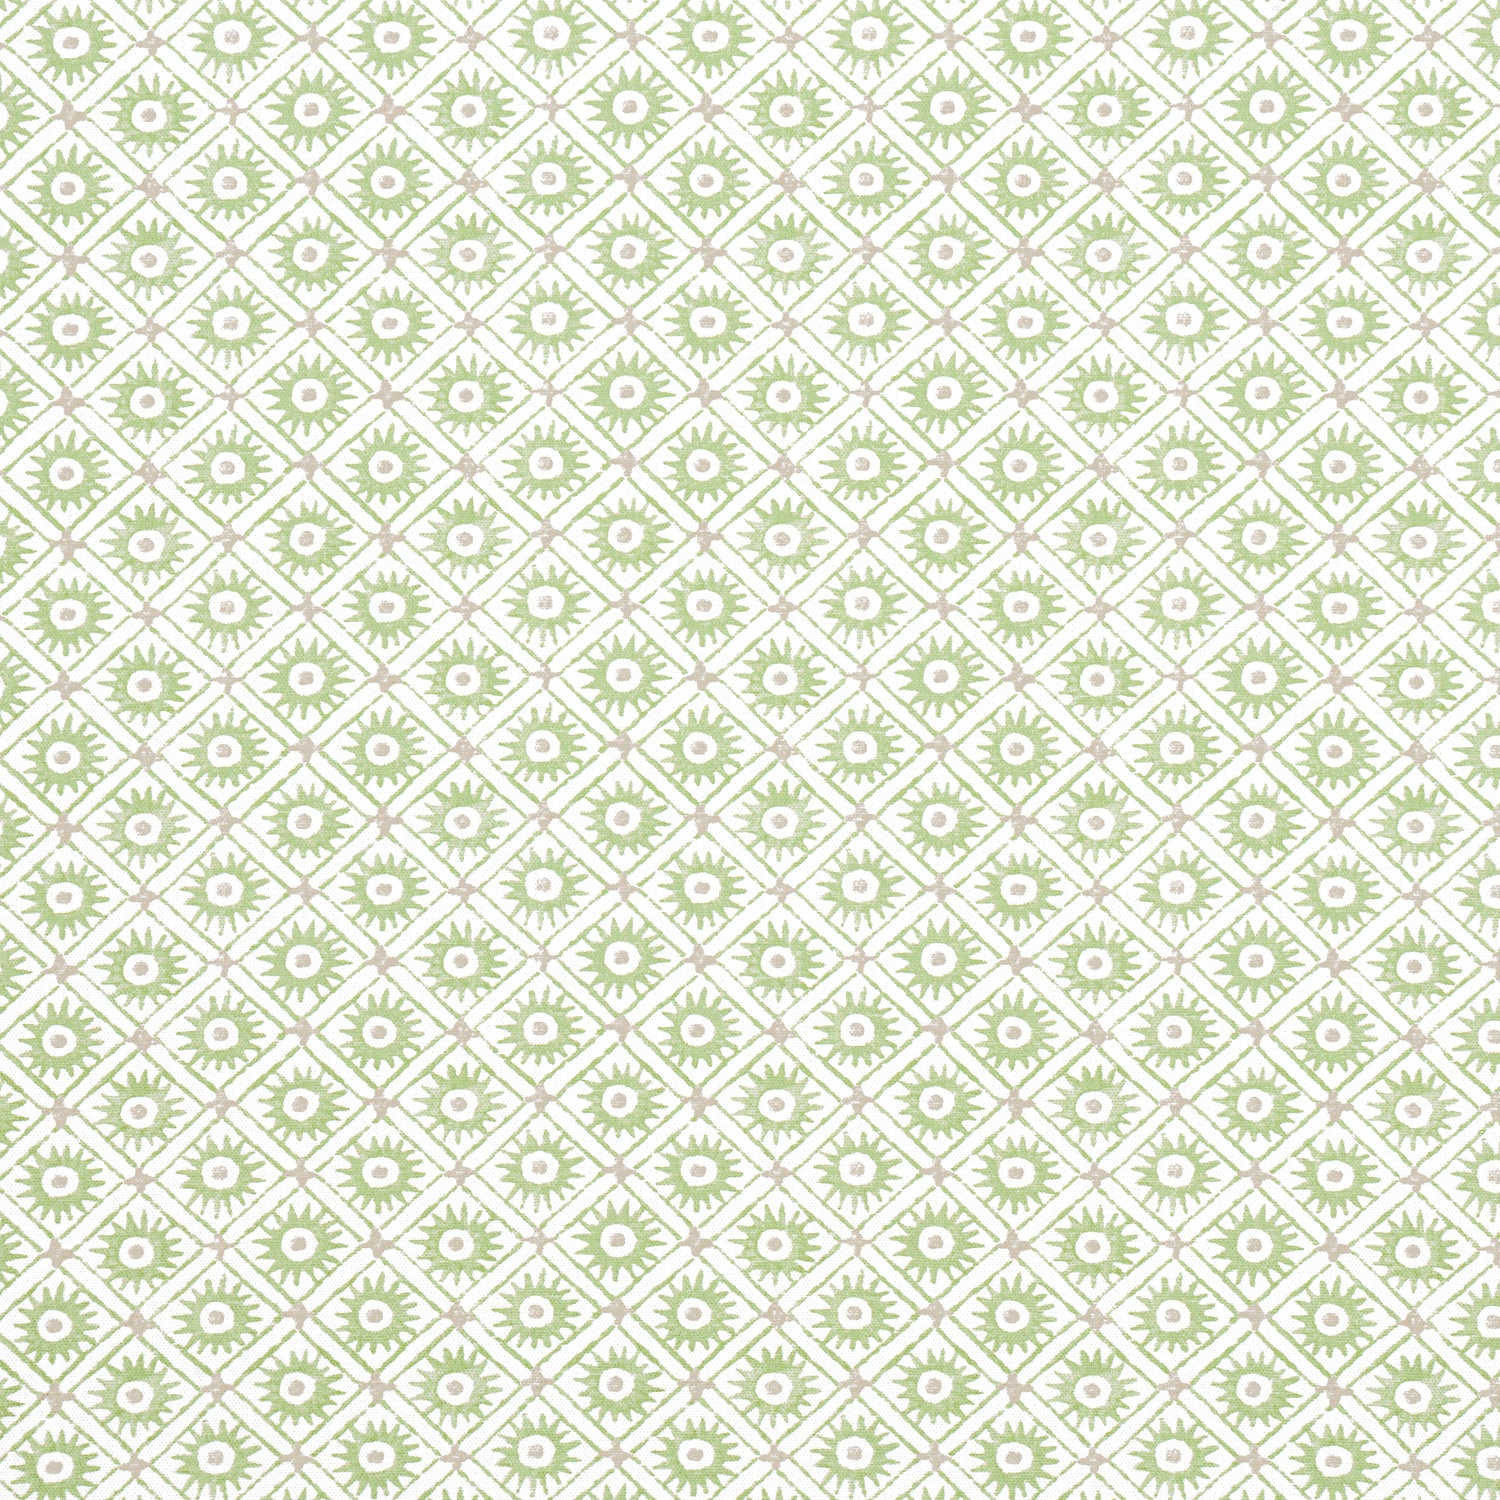 Mini Sun fabric in Green color - pattern number AF24568 - by Anna French in the Devon collection